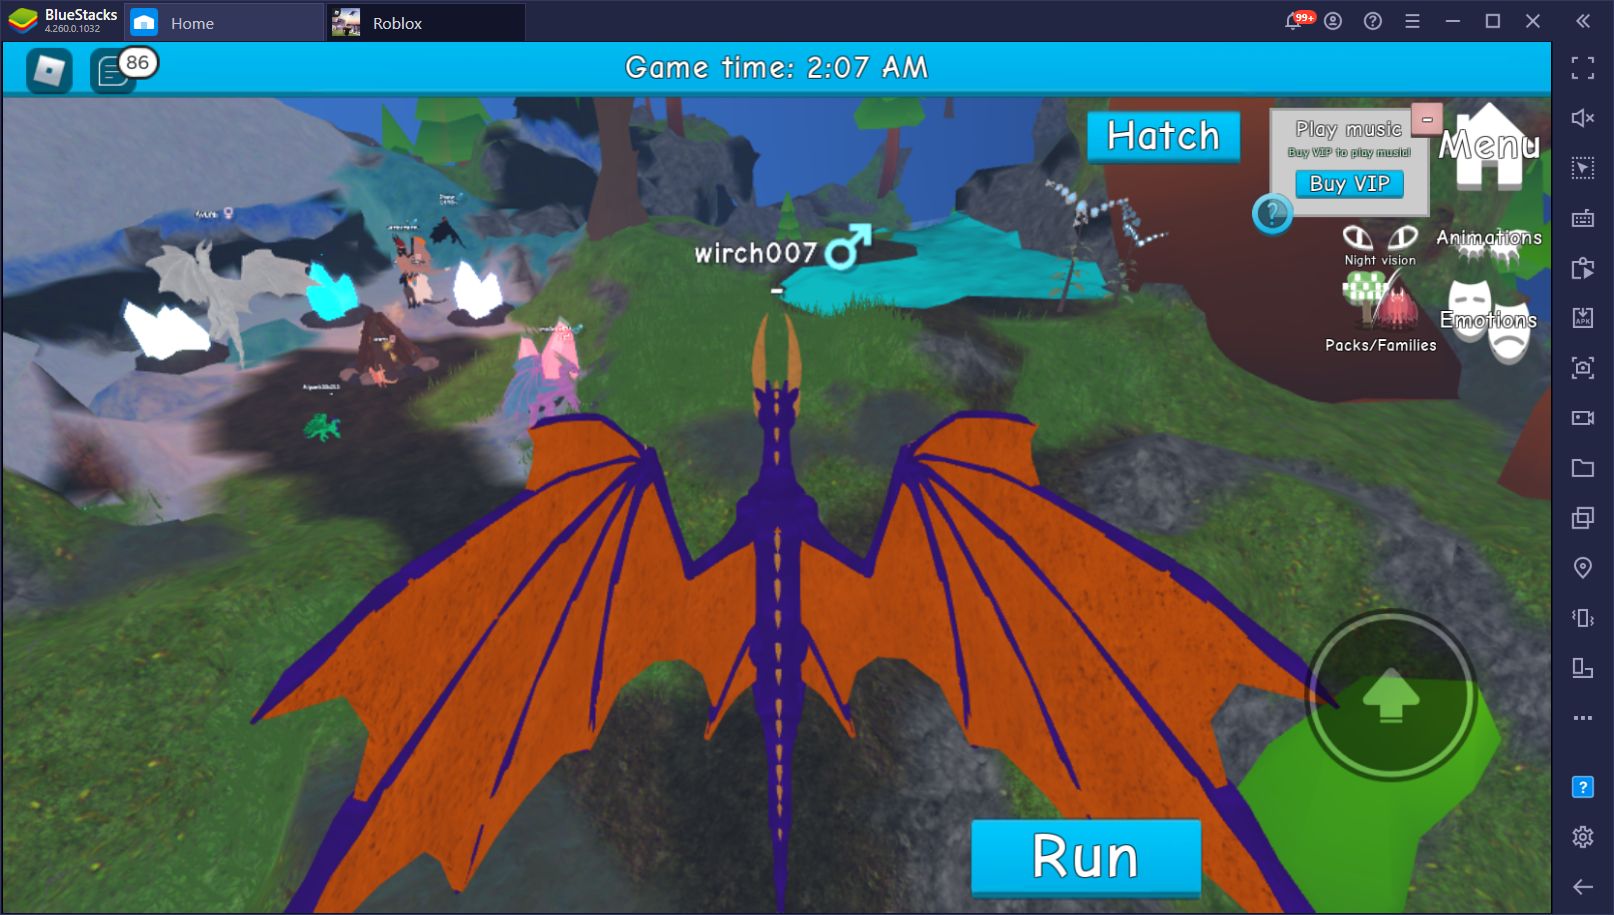 The Best Roblox Games To Play In 2021 Bluestacks - dragon life roblox fly